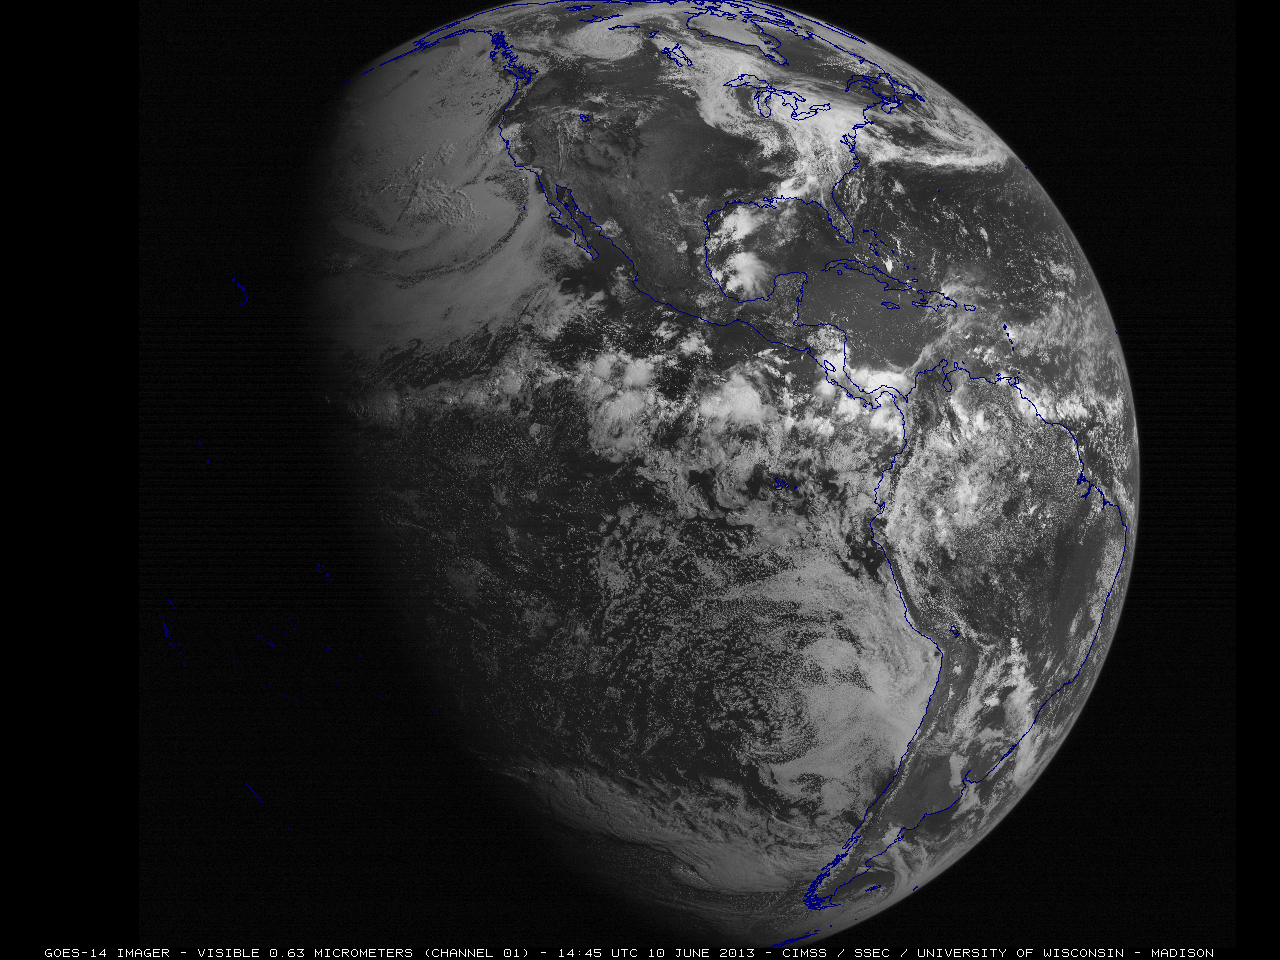 GOES-14 vs GOES-13 Full Disk 0.63 Âµm visible channel images